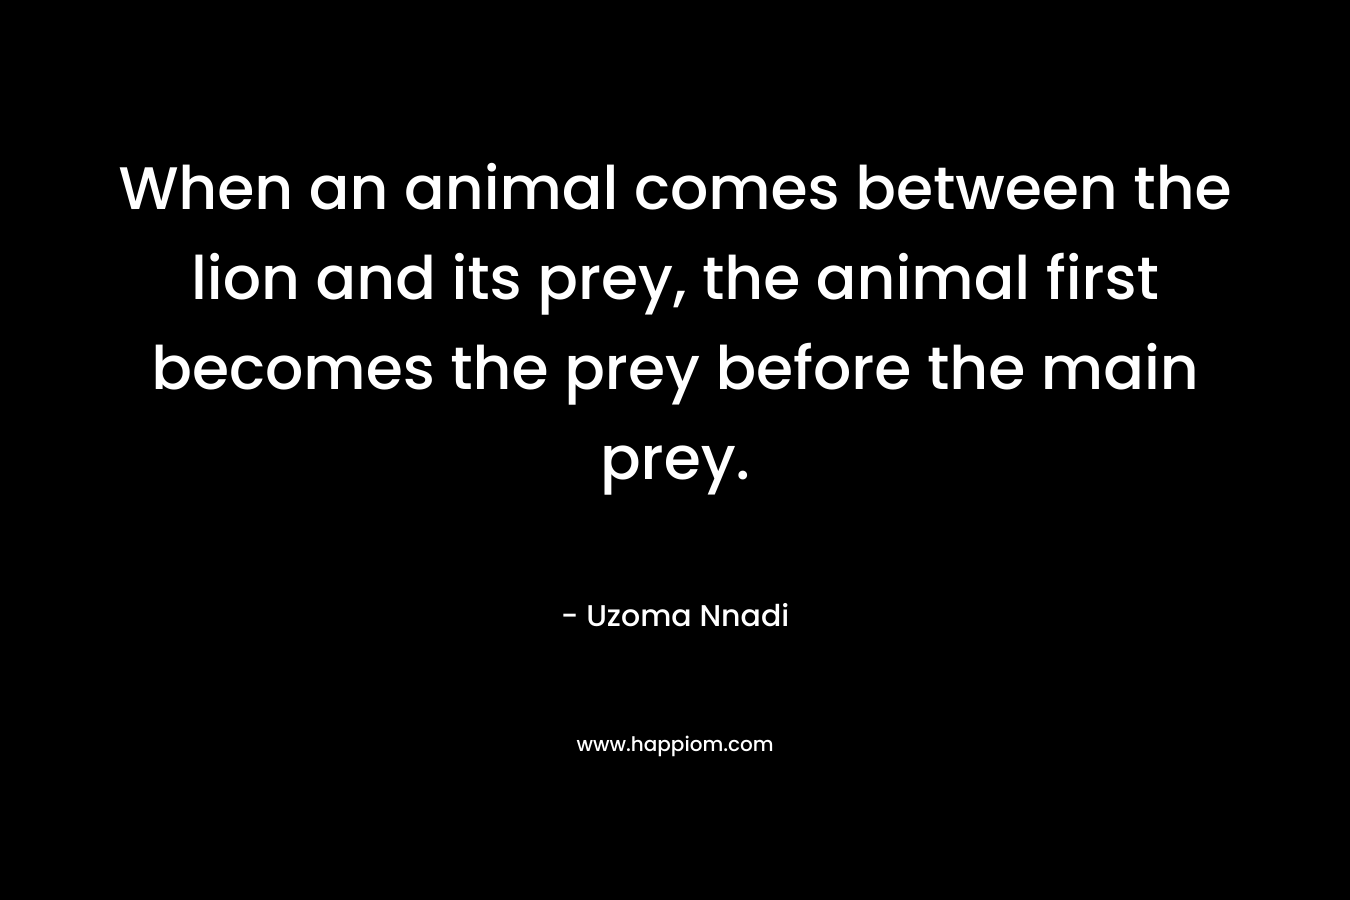 When an animal comes between the lion and its prey, the animal first becomes the prey before the main prey.